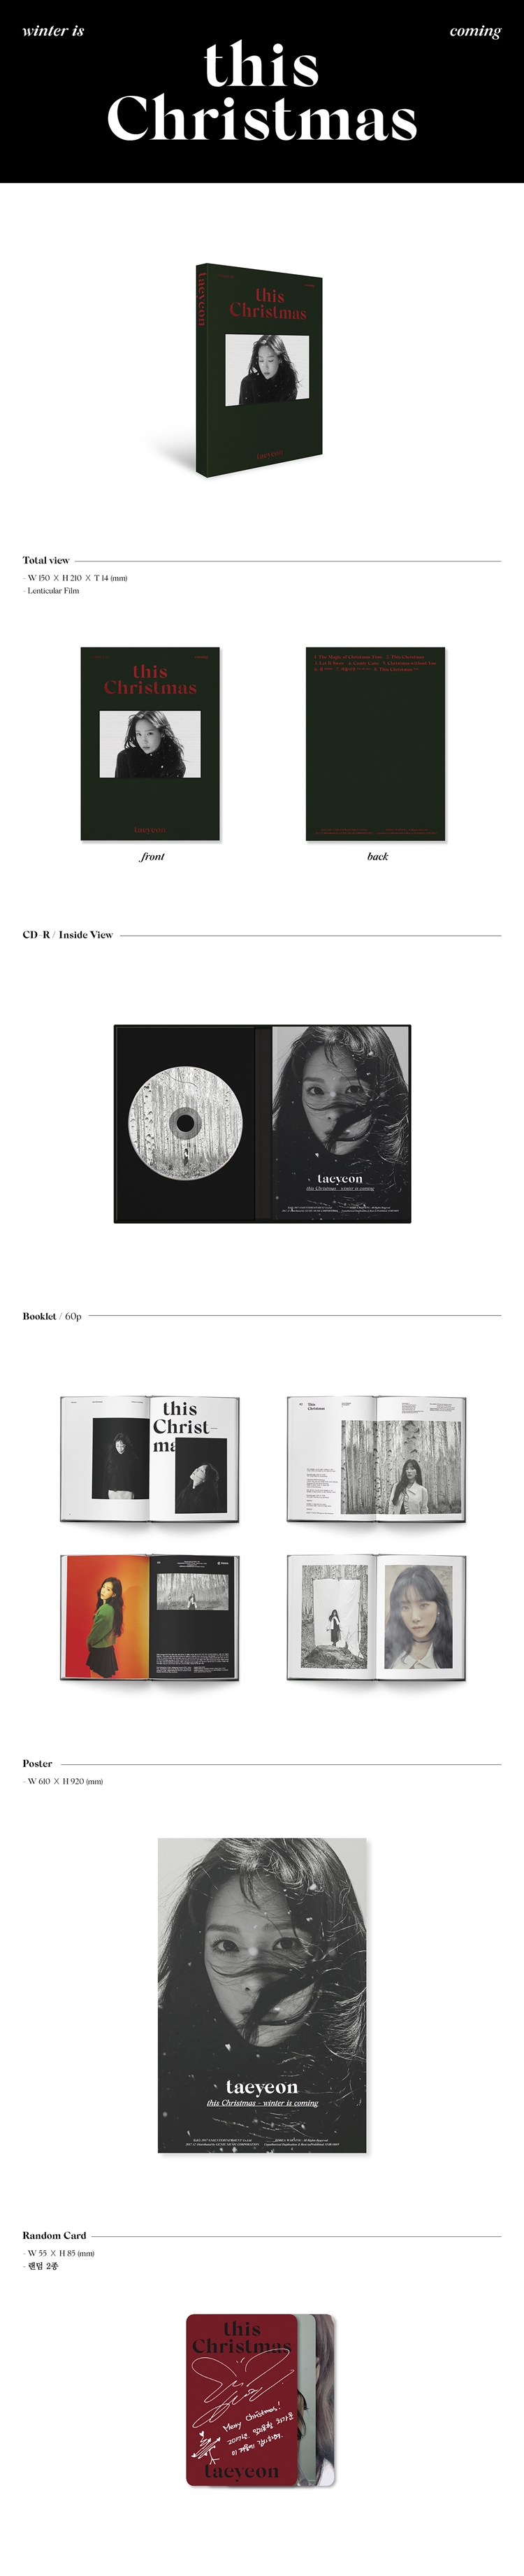 TAEYEON  WINTER ALBUM THIS CHRISTMAS  WINTER IS COMING